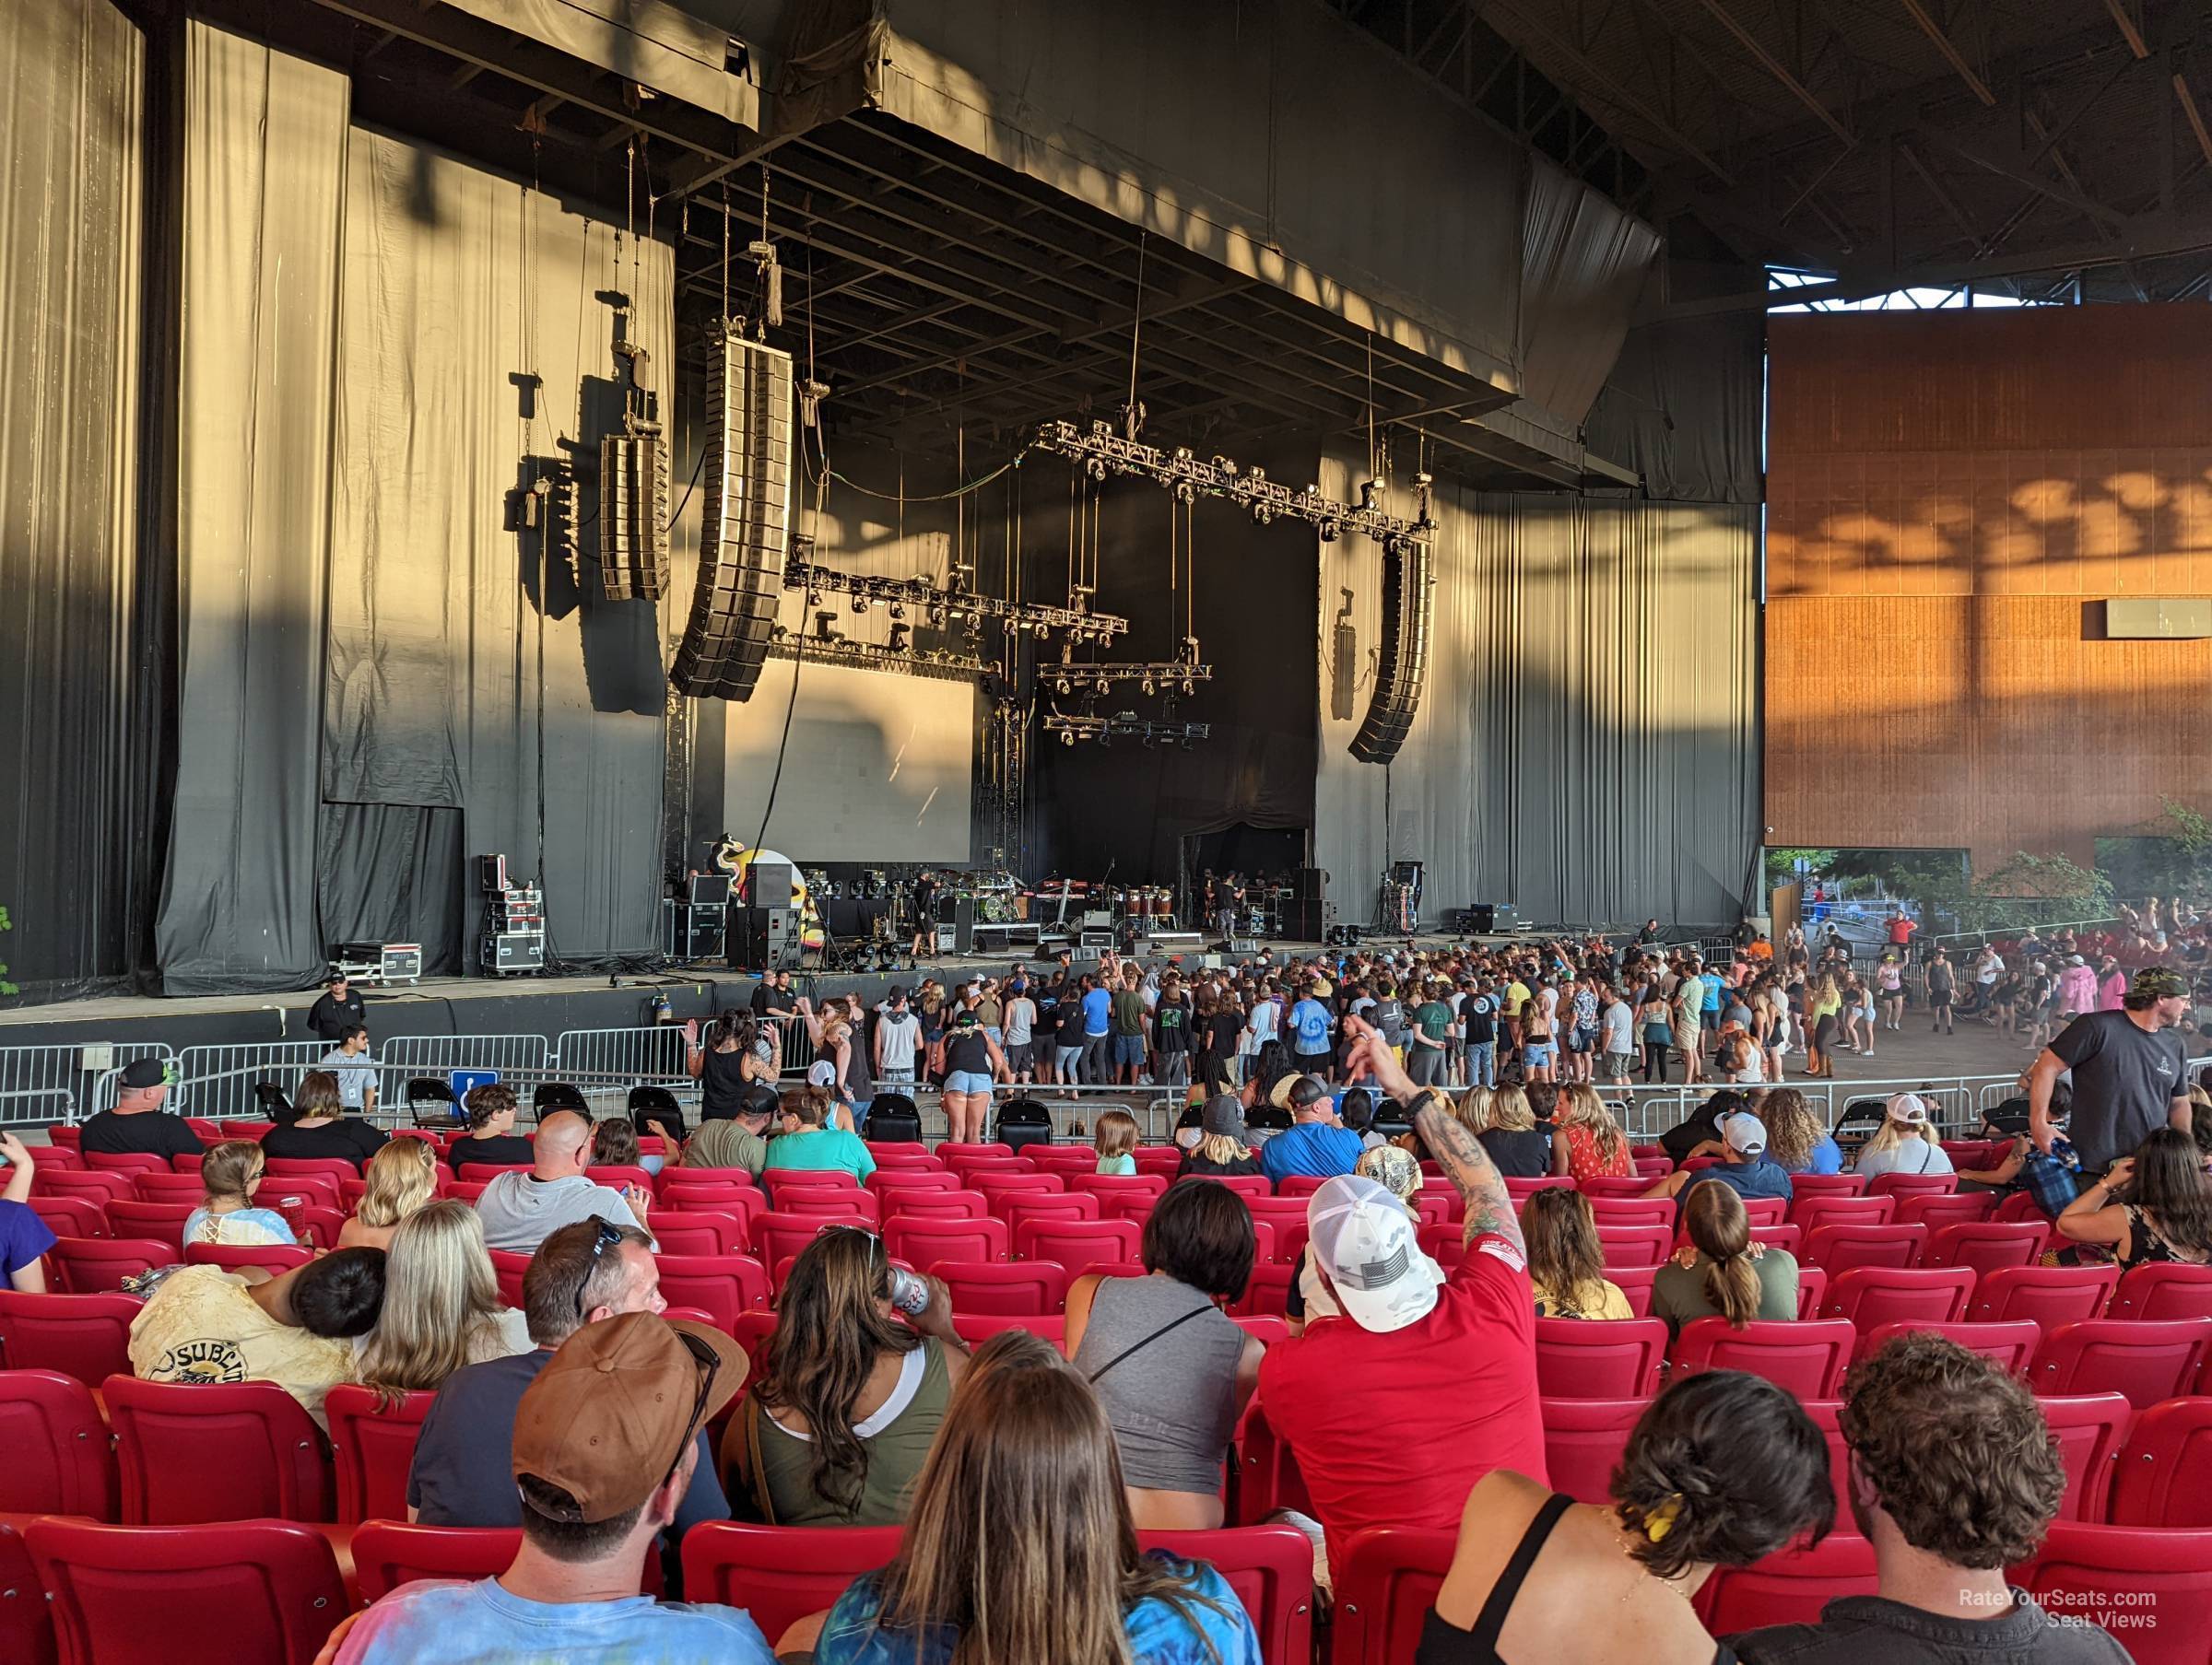 Section 105 at White River Amphitheatre